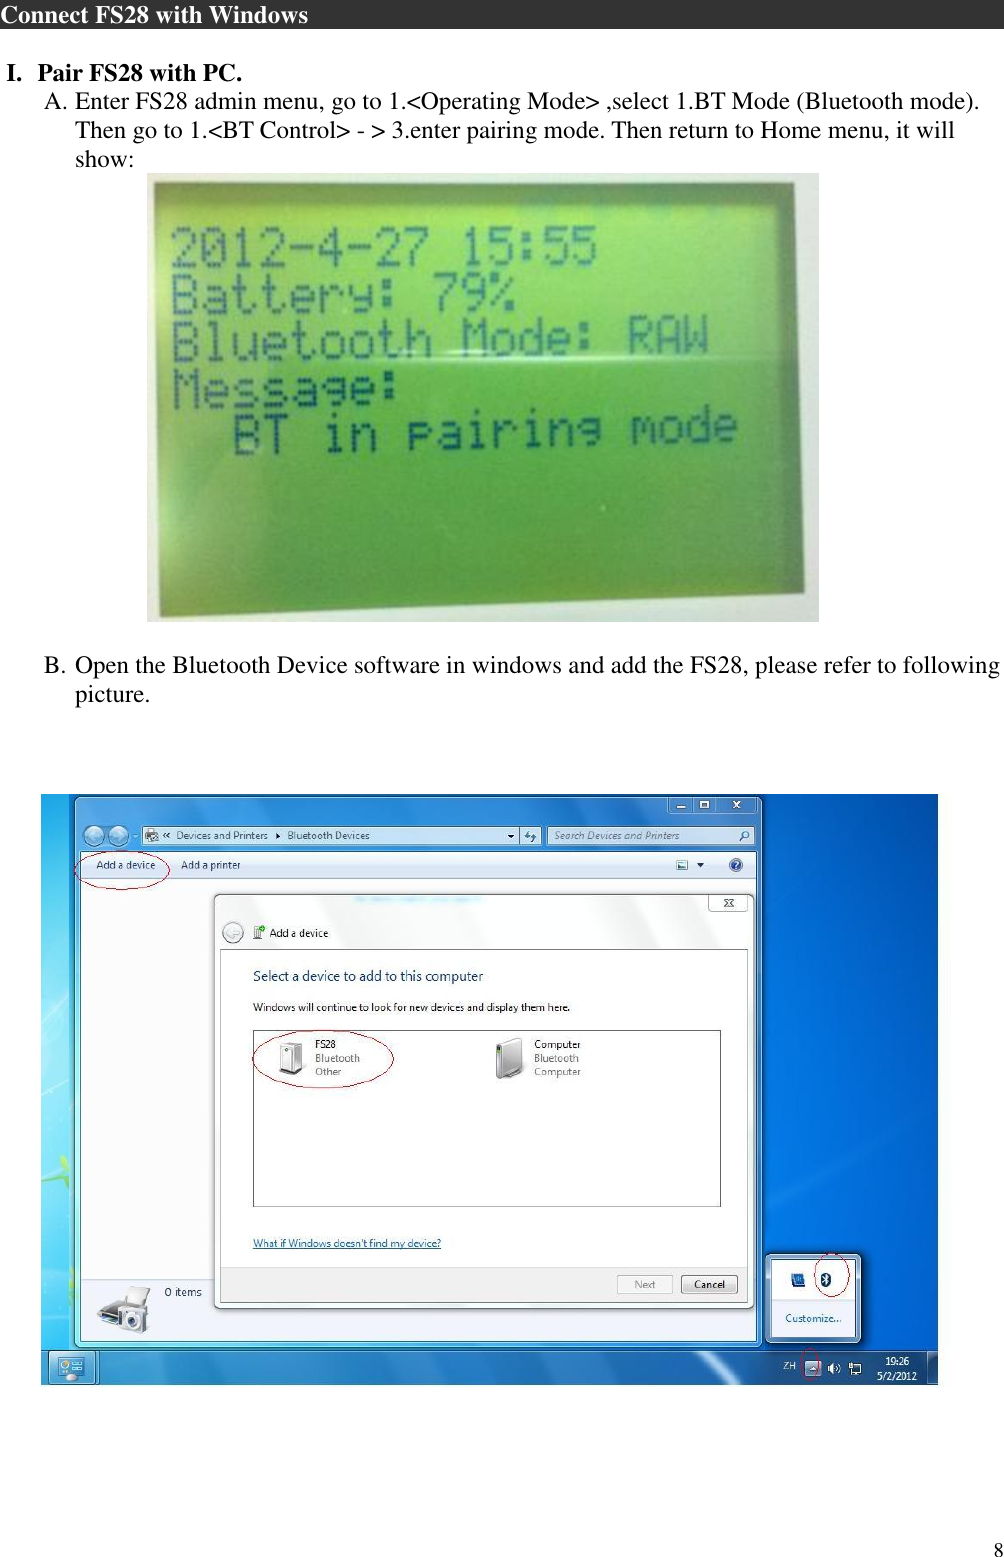  8 Connect FS28 with Windows                                                           I. Pair FS28 with PC.  A. Enter FS28 admin menu, go to 1.&lt;Operating Mode&gt; ,select 1.BT Mode (Bluetooth mode). Then go to 1.&lt;BT Control&gt; - &gt; 3.enter pairing mode. Then return to Home menu, it will show:        B. Open the Bluetooth Device software in windows and add the FS28, please refer to following picture.     